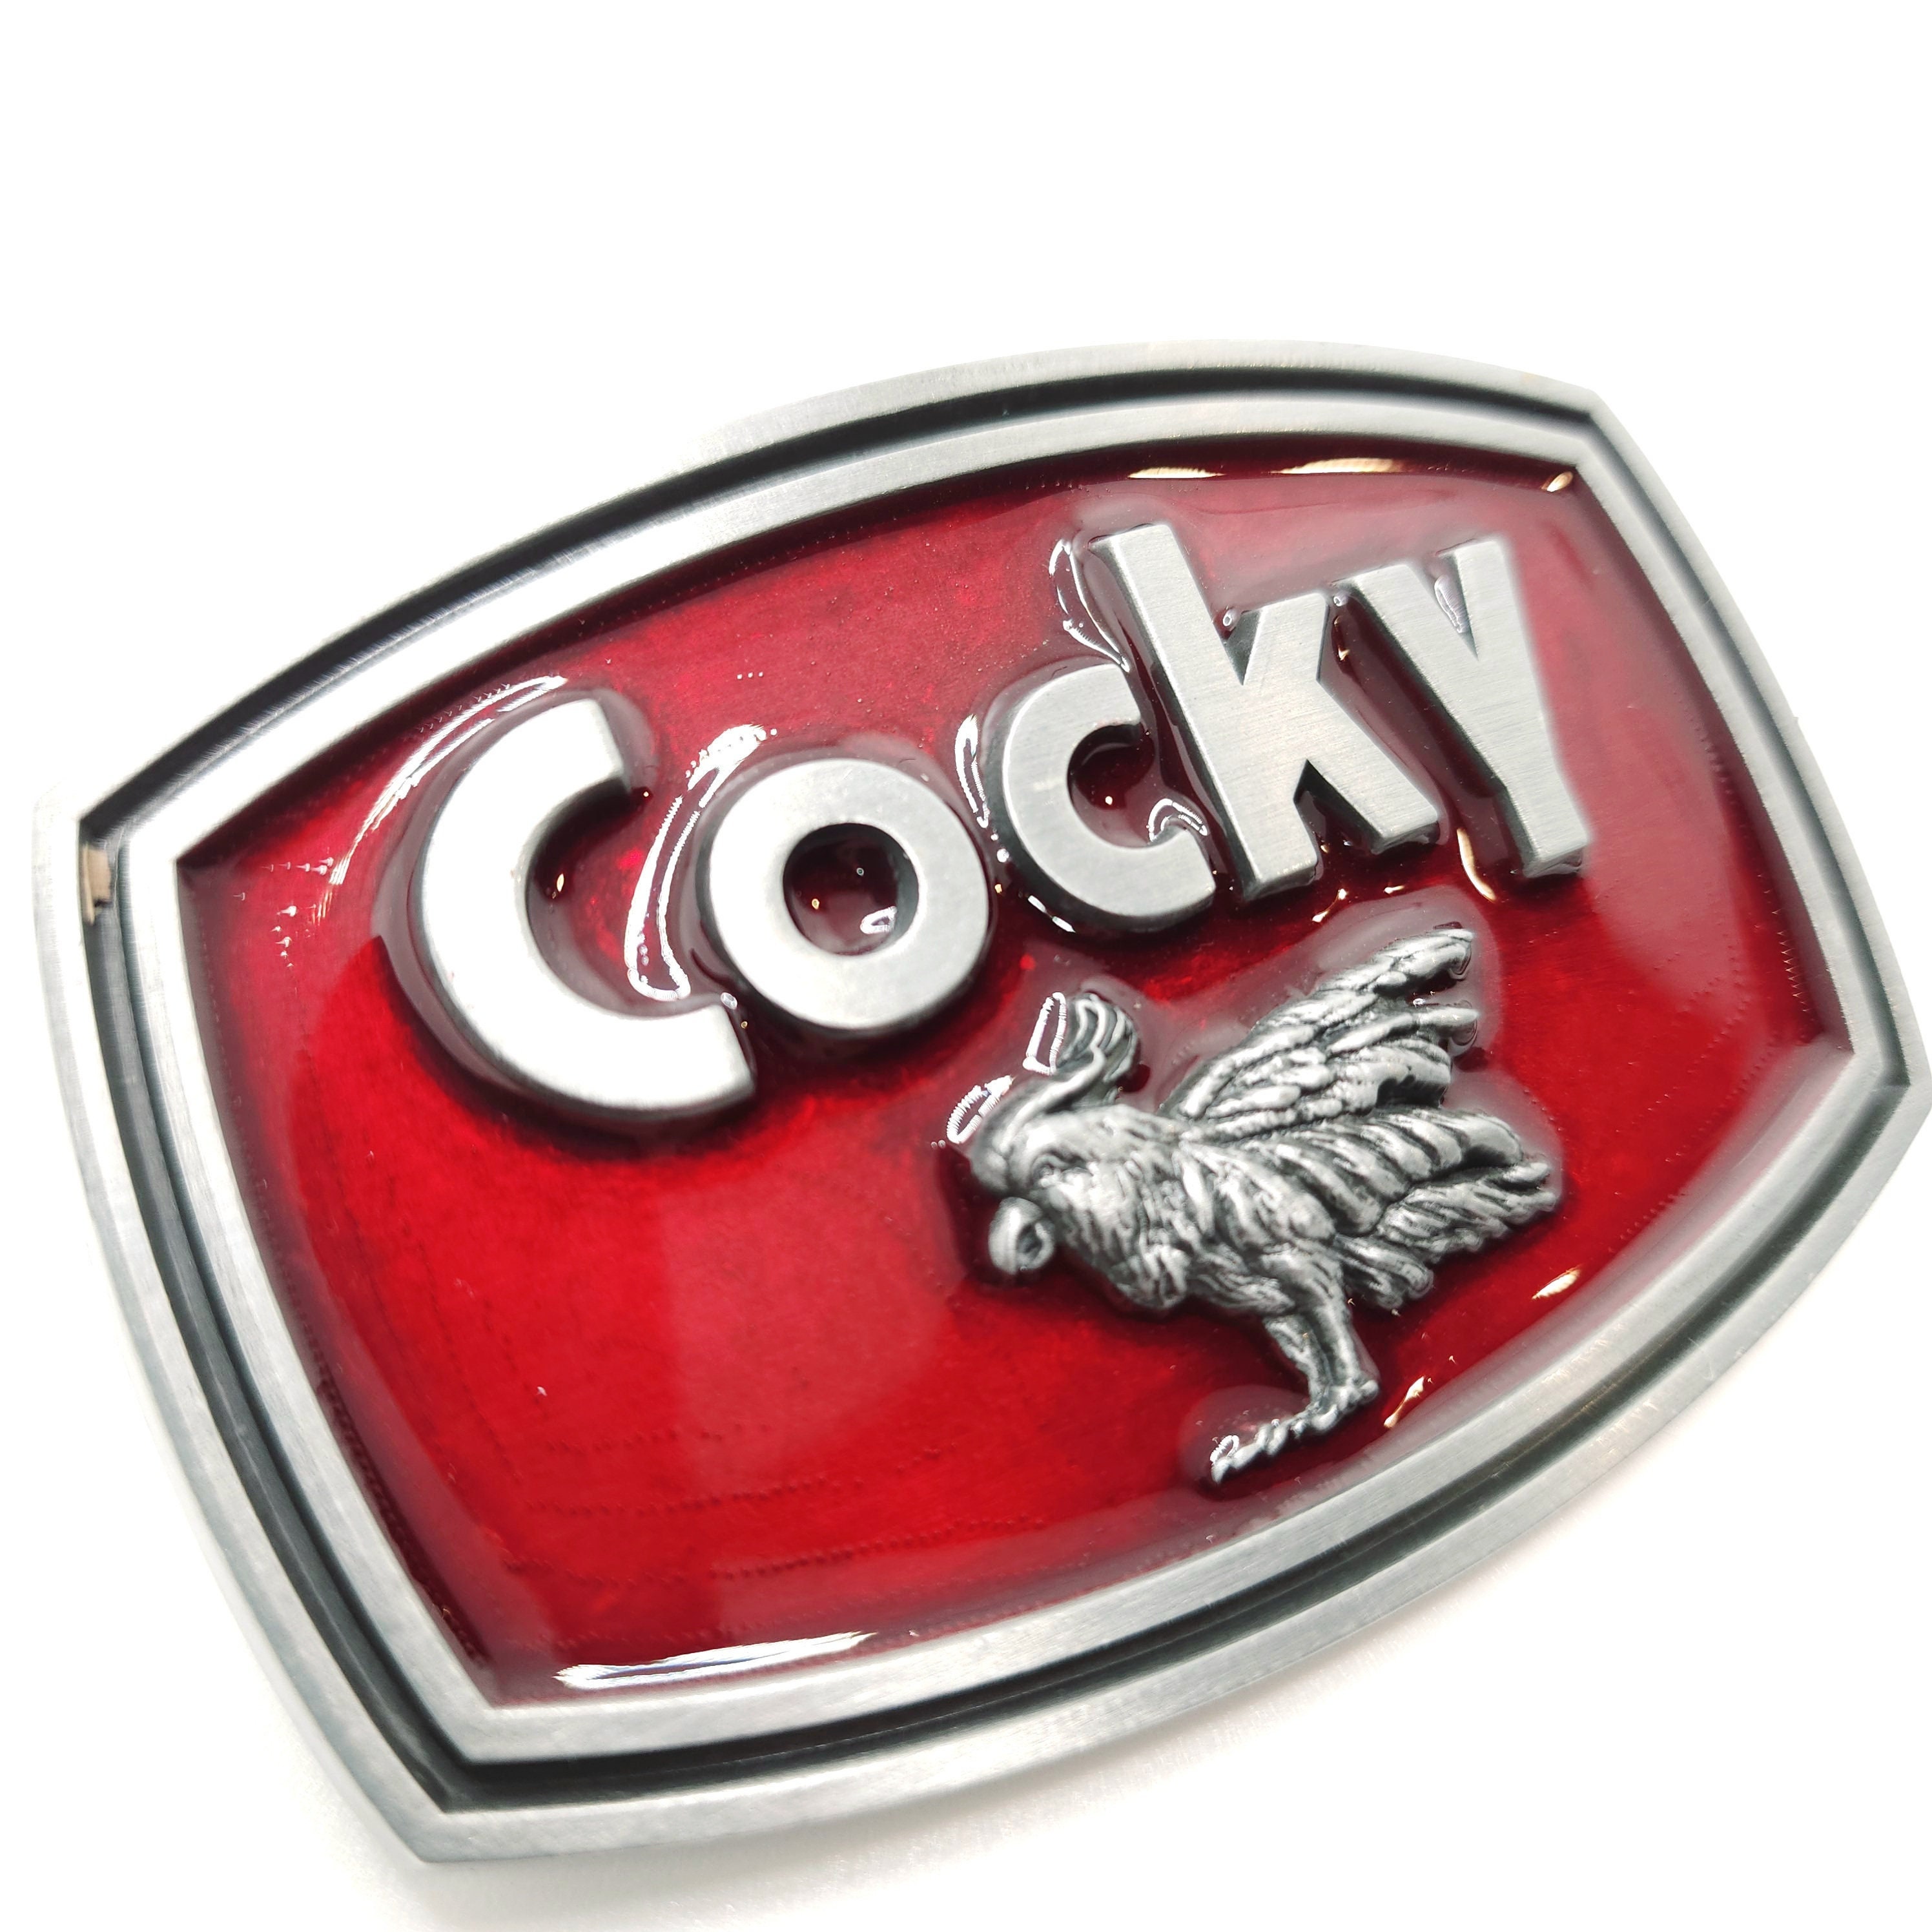 Cocky Fashion Metal Belt Buckle Red Cool